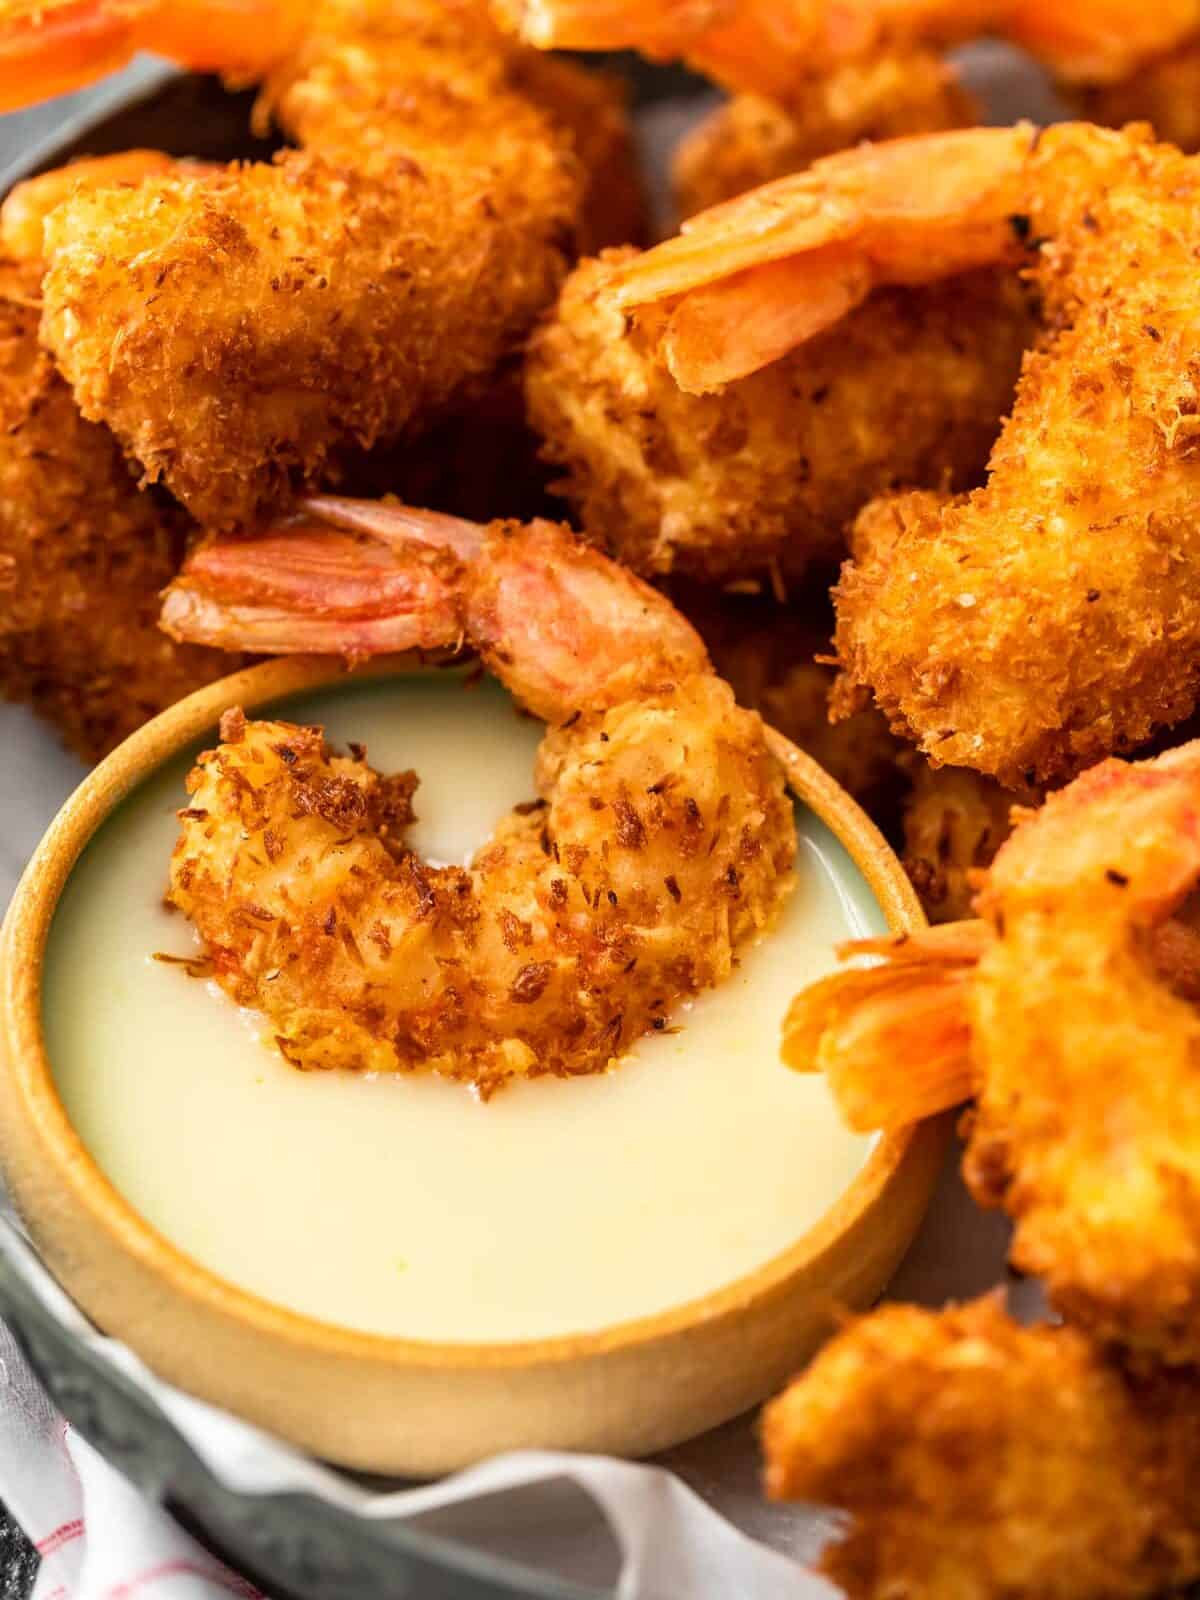 Coconut Shrimp is a crispy, crave-worthy appetizer that everyone will love. It's especially delicious when paired with the perfect coconut shrimp sauce: a Spicy Pina Colada Dipping Sauce! The two go hand in hand, a match made in heaven. And this coconut shrimp recipe is just as good as a main dish as it is as a party appetizer!